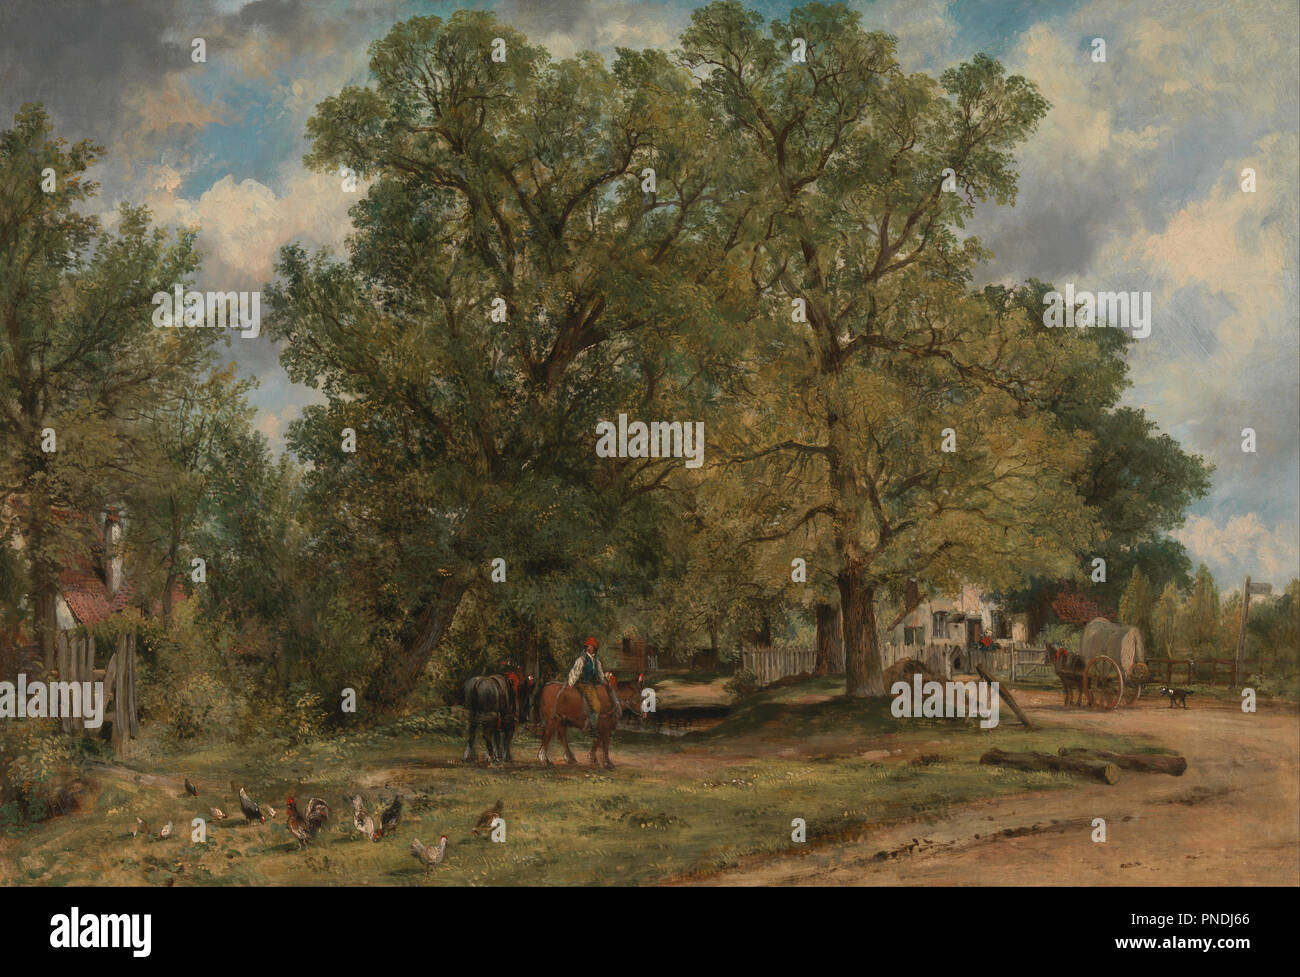 Landscape with Cottages. Date/Period: Ca. 1830. Painting. Oil on canvas. Height: 508 mm (20 in); Width: 730 mm (28.74 in). Author: Frederick W. Watts. Stock Photo